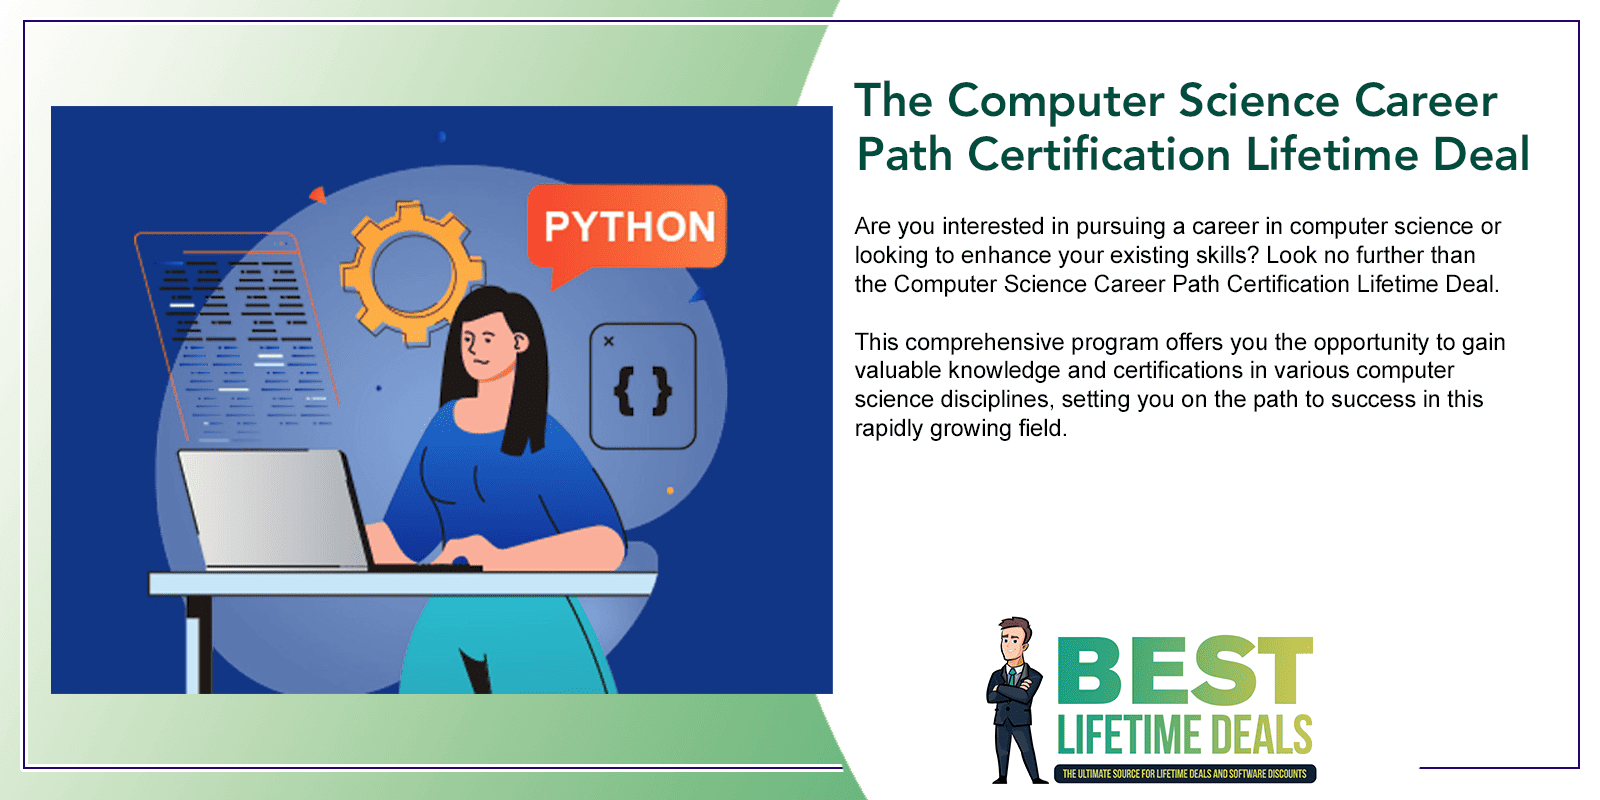 The Computer Science Career Path Certification Lifetime Deal